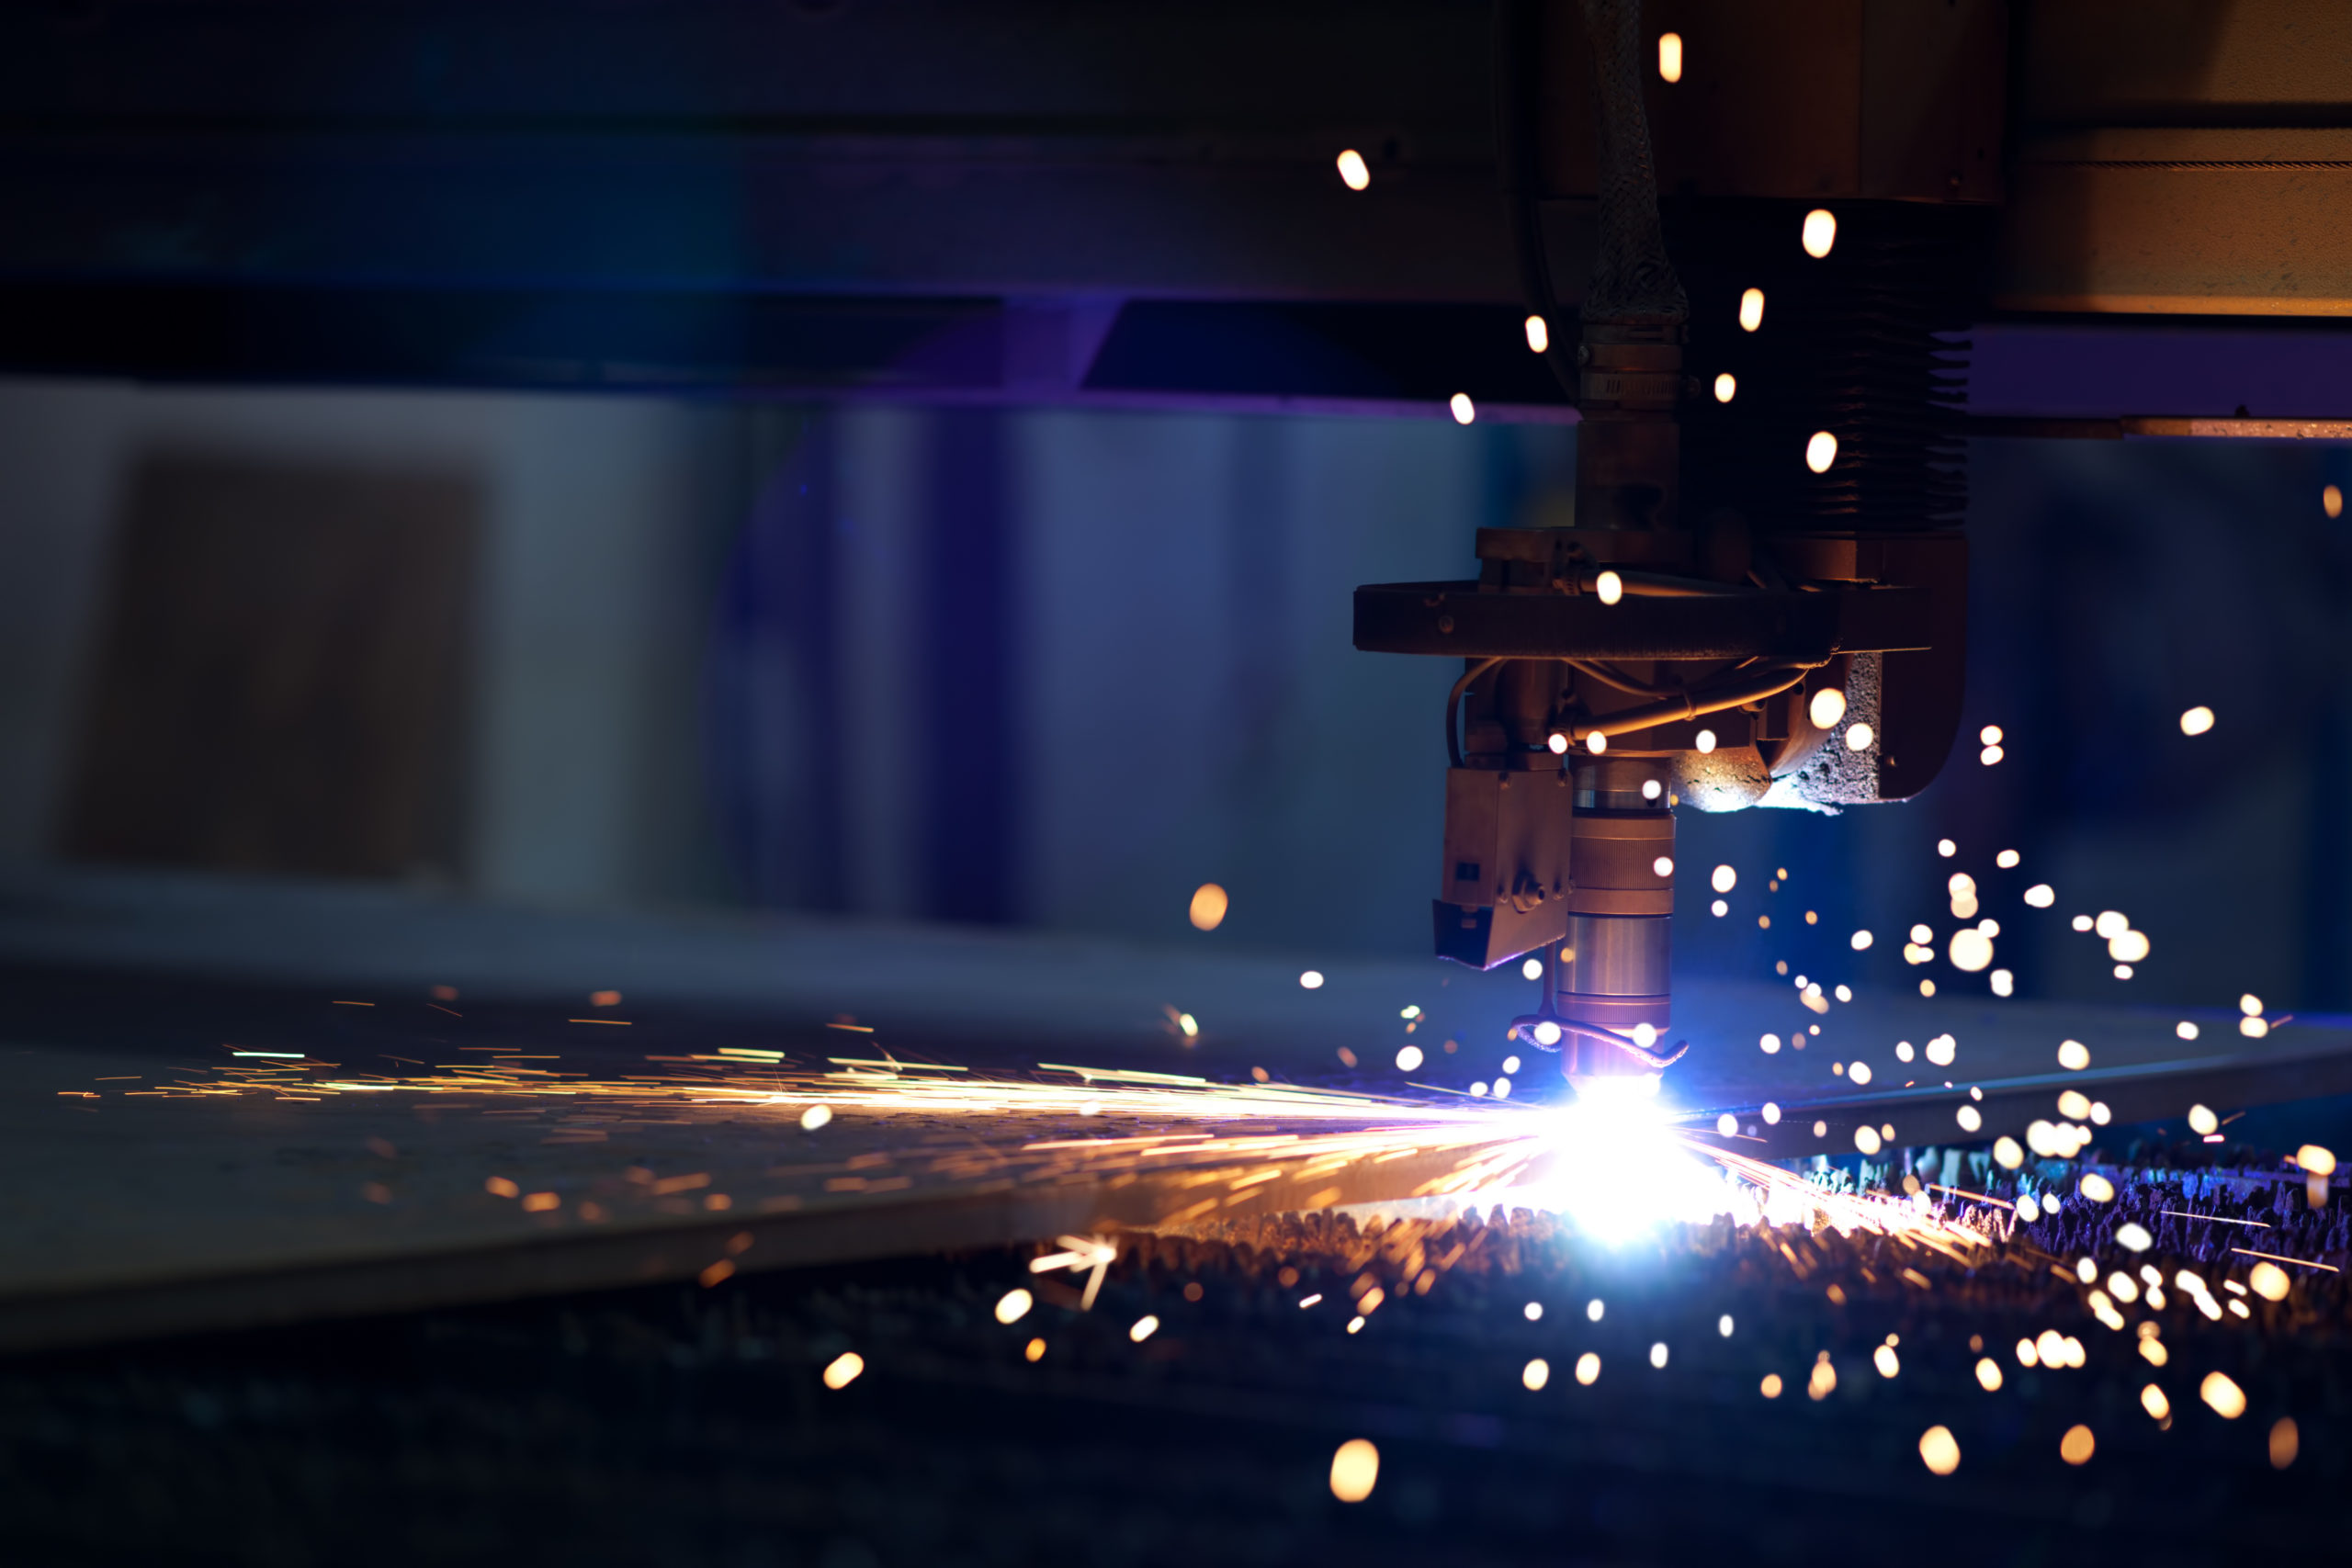 Manufacturing in 2021: 4 factors to consider